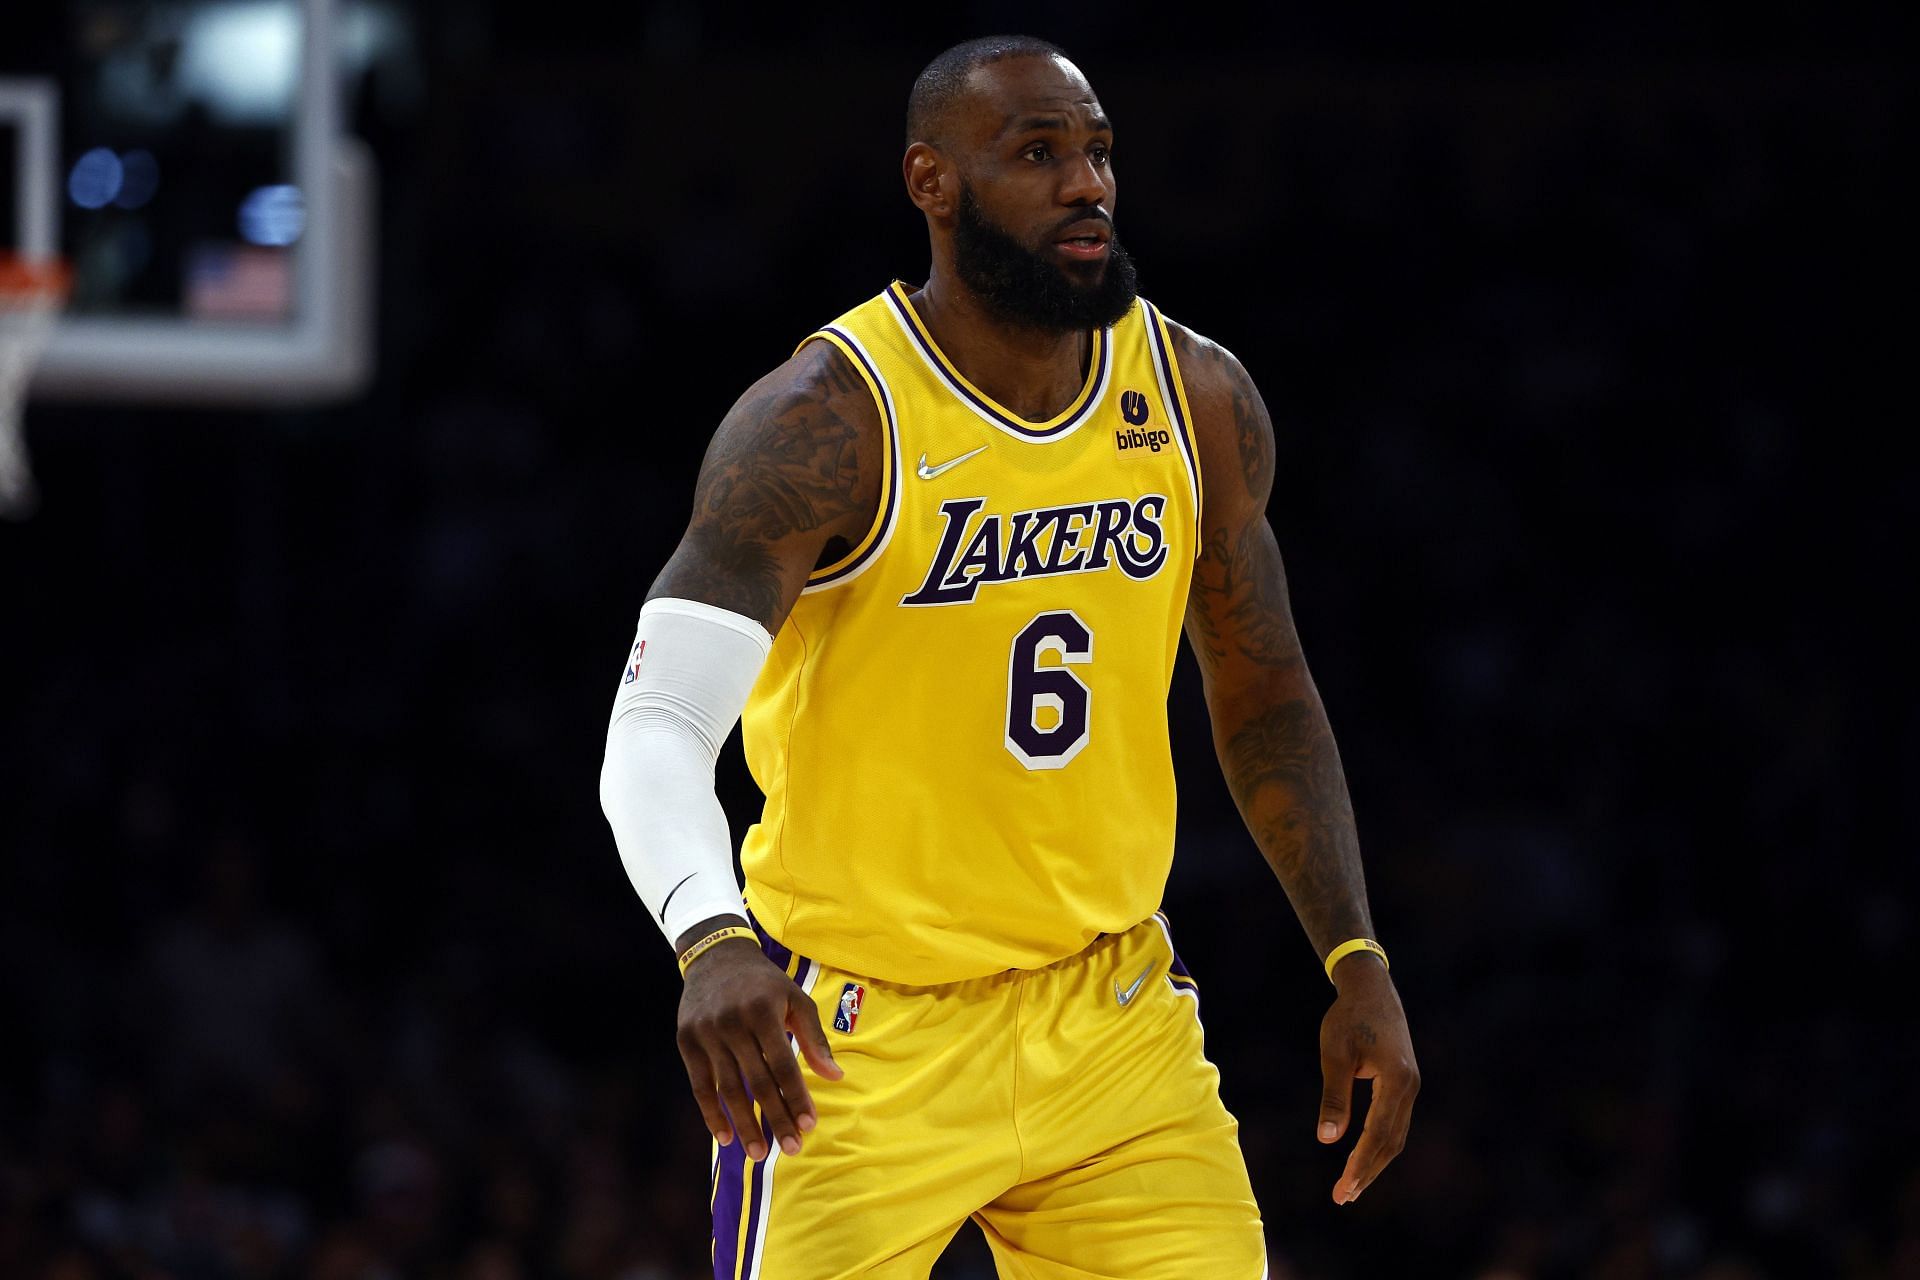 LeBron James of the LA Lakers has 37.062 career points.